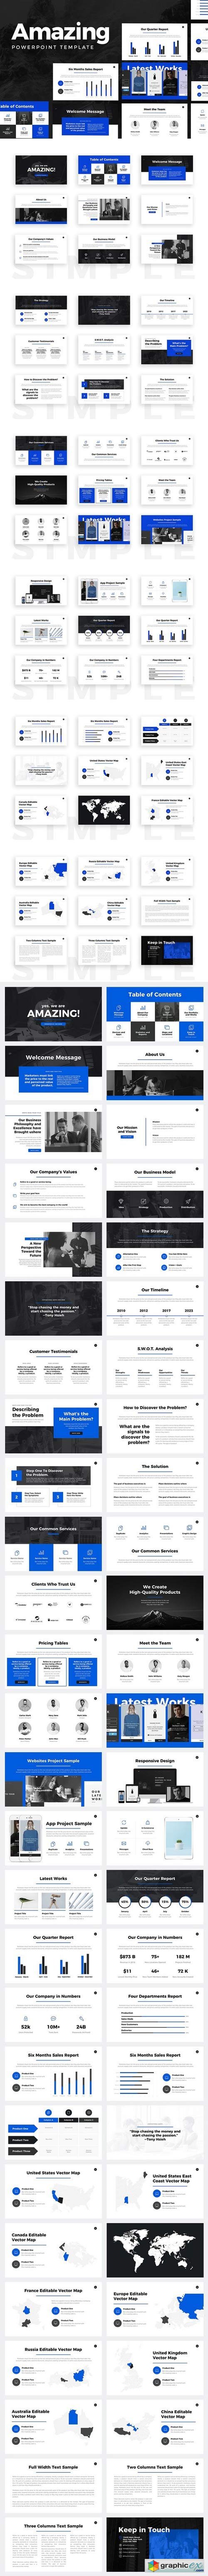 Amazing PowerPoint Template 1890650